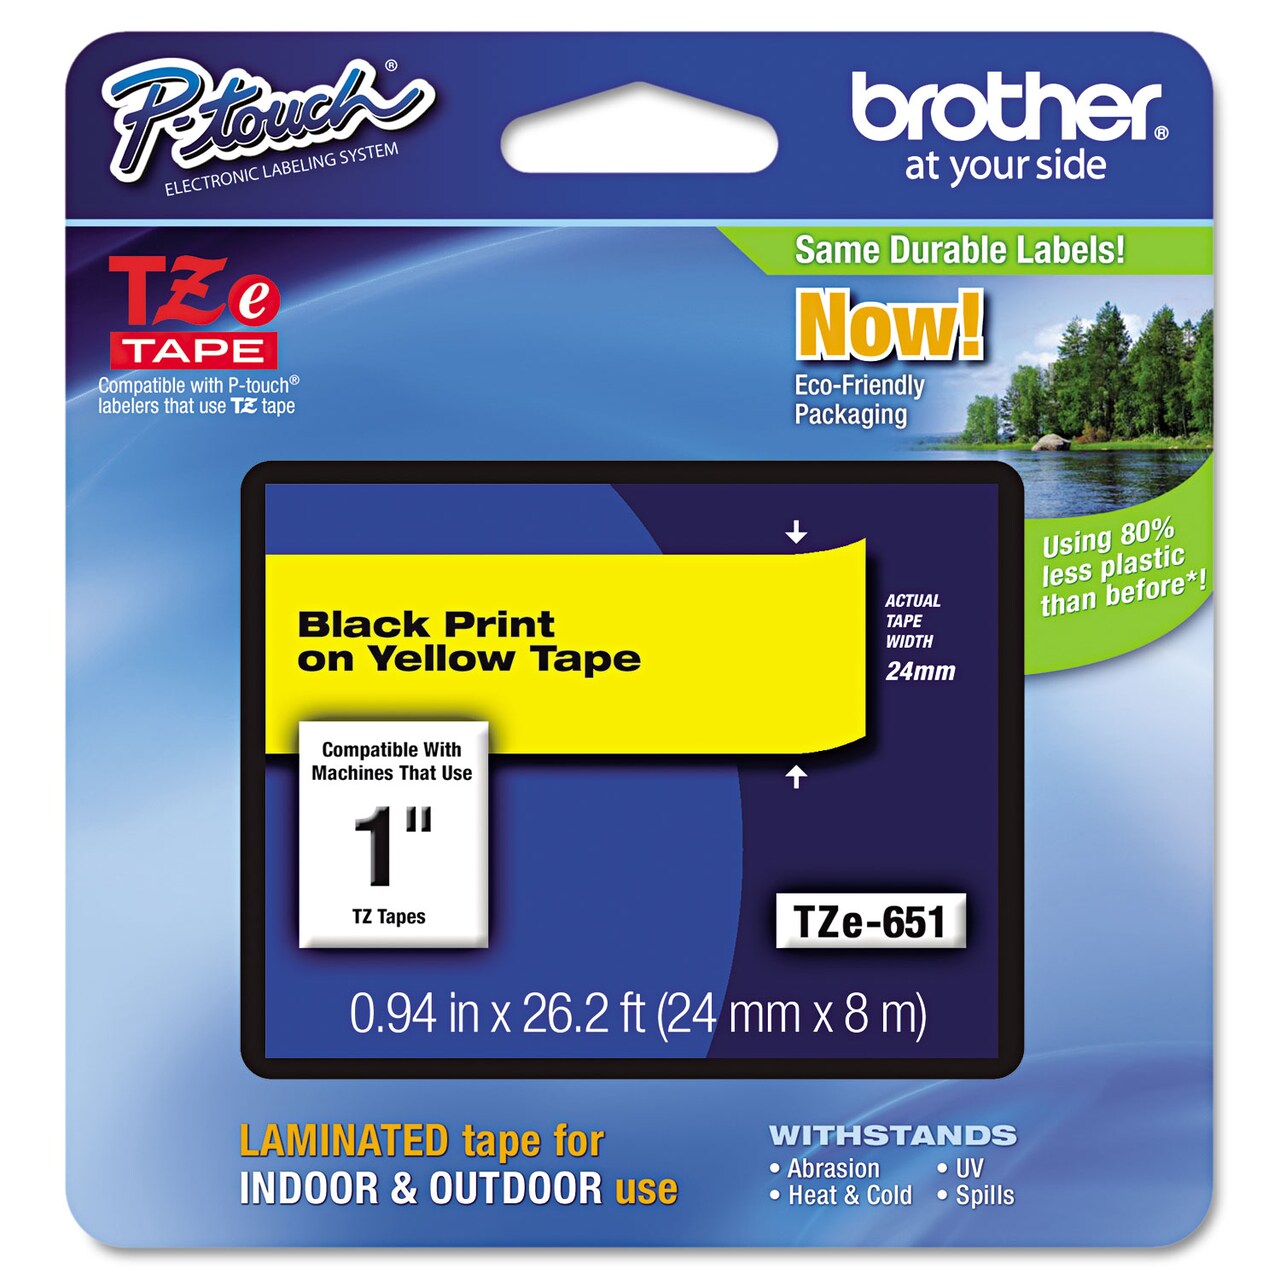 Brother TZe Standard Adhesive Laminated Labeling Tape 0.94 x 26.2 ft Black on Yellow